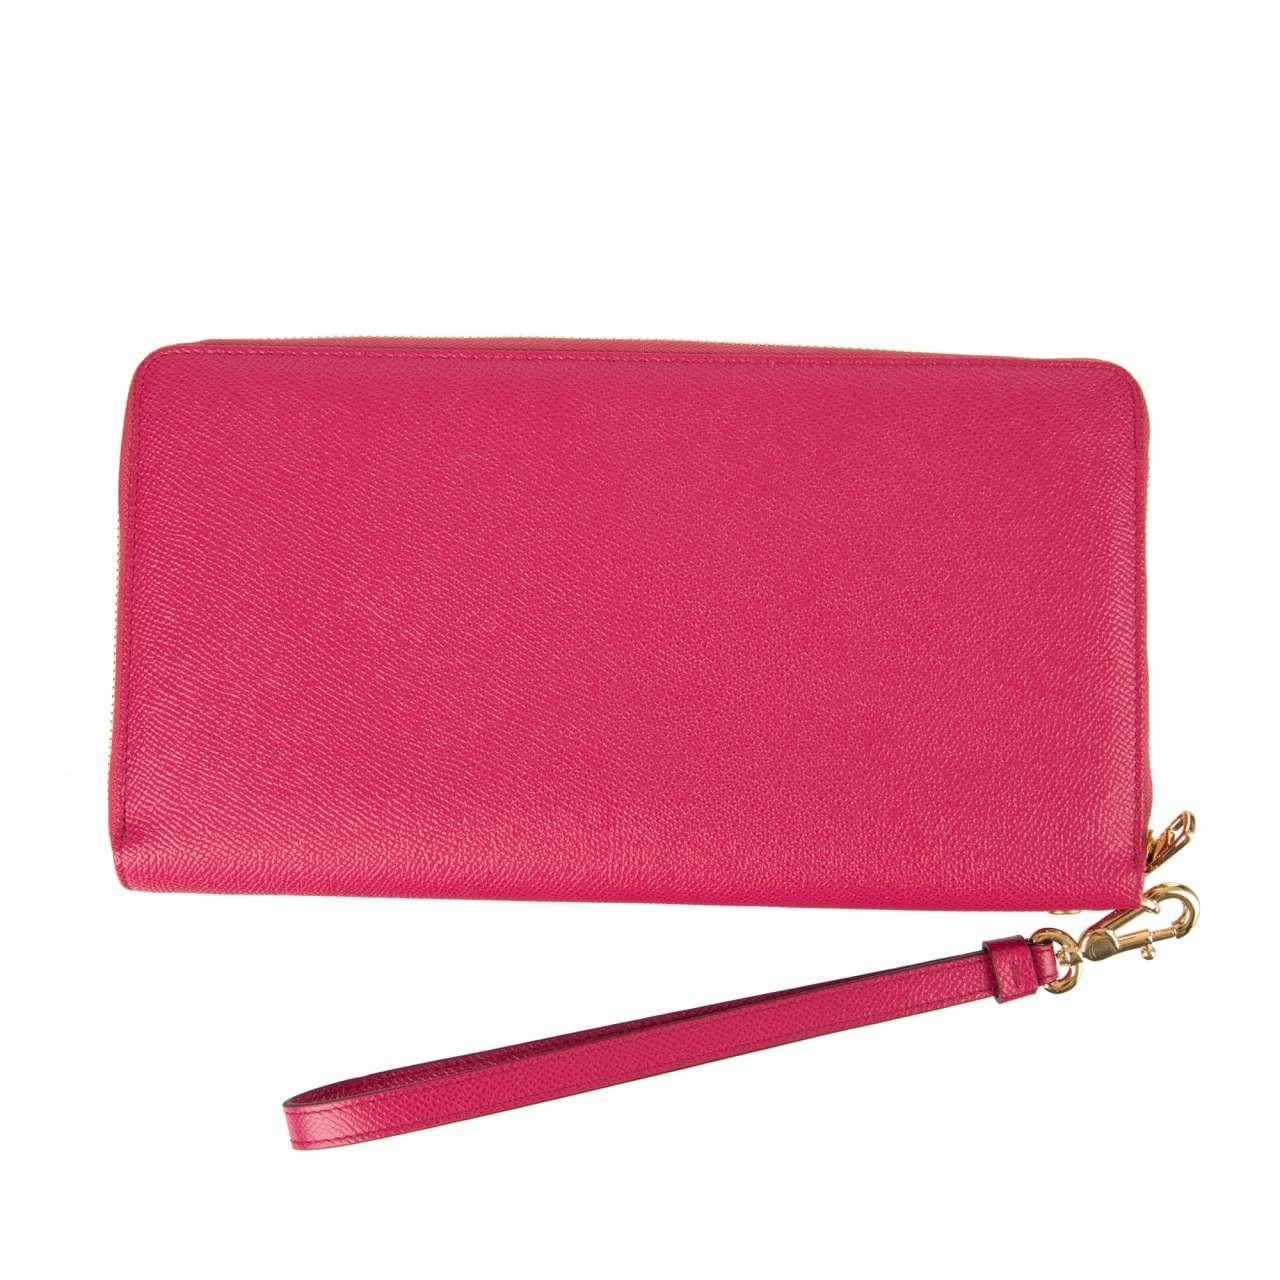 Dolce & Gabbana - Dauphine Leather Clutch Wallet Bag with Logo Pink For Sale 2